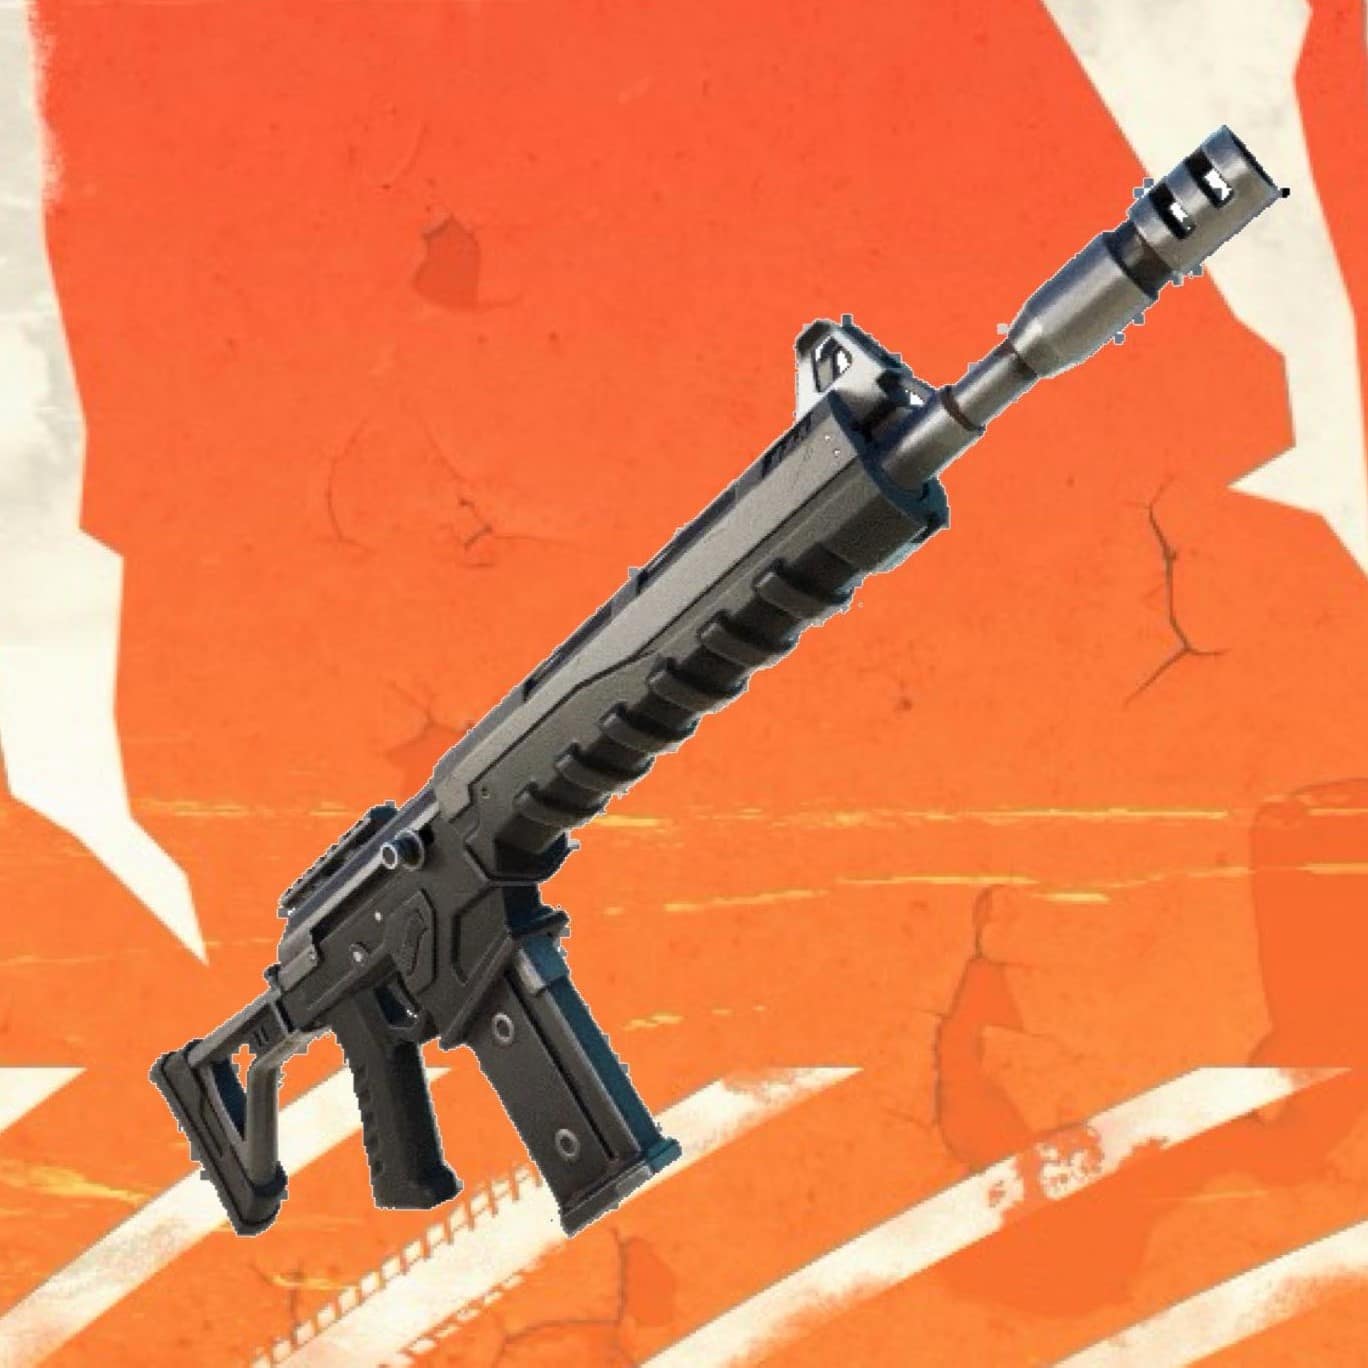 The Machinist’s Combat Assault Rifle in Fortnite.